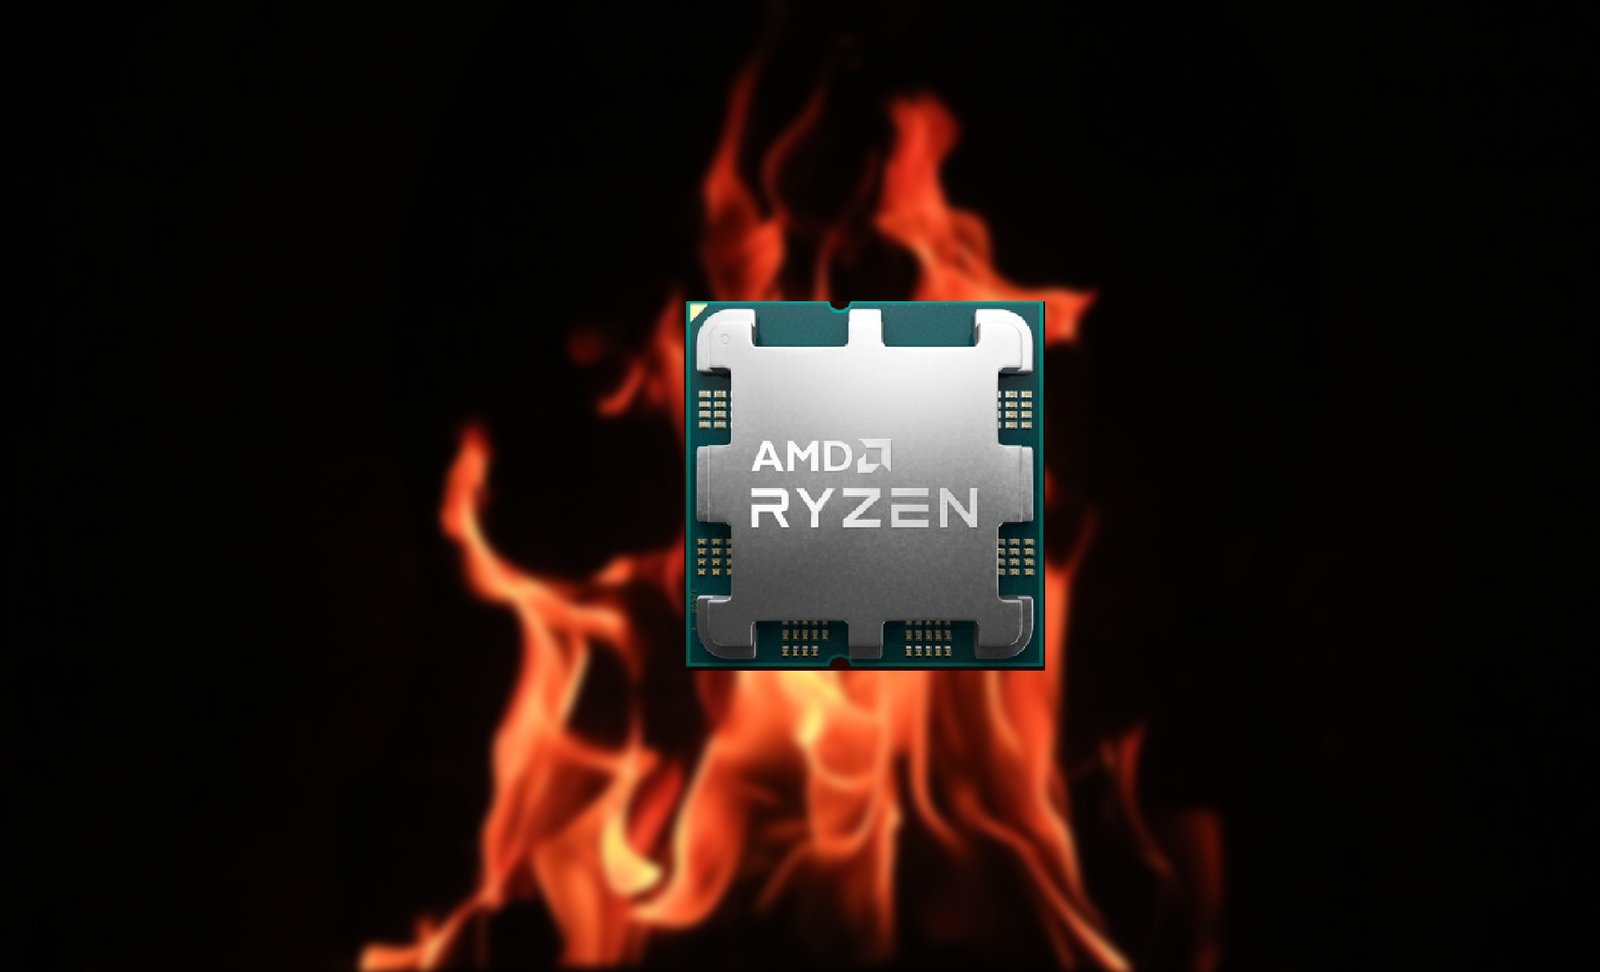 AMD Ryzen 9 7950X and Ryzen 5 7600X thermals are reportedly out of alter at 95 C and 90 C respectively as the Core i9-13900K runs comparatively cooler